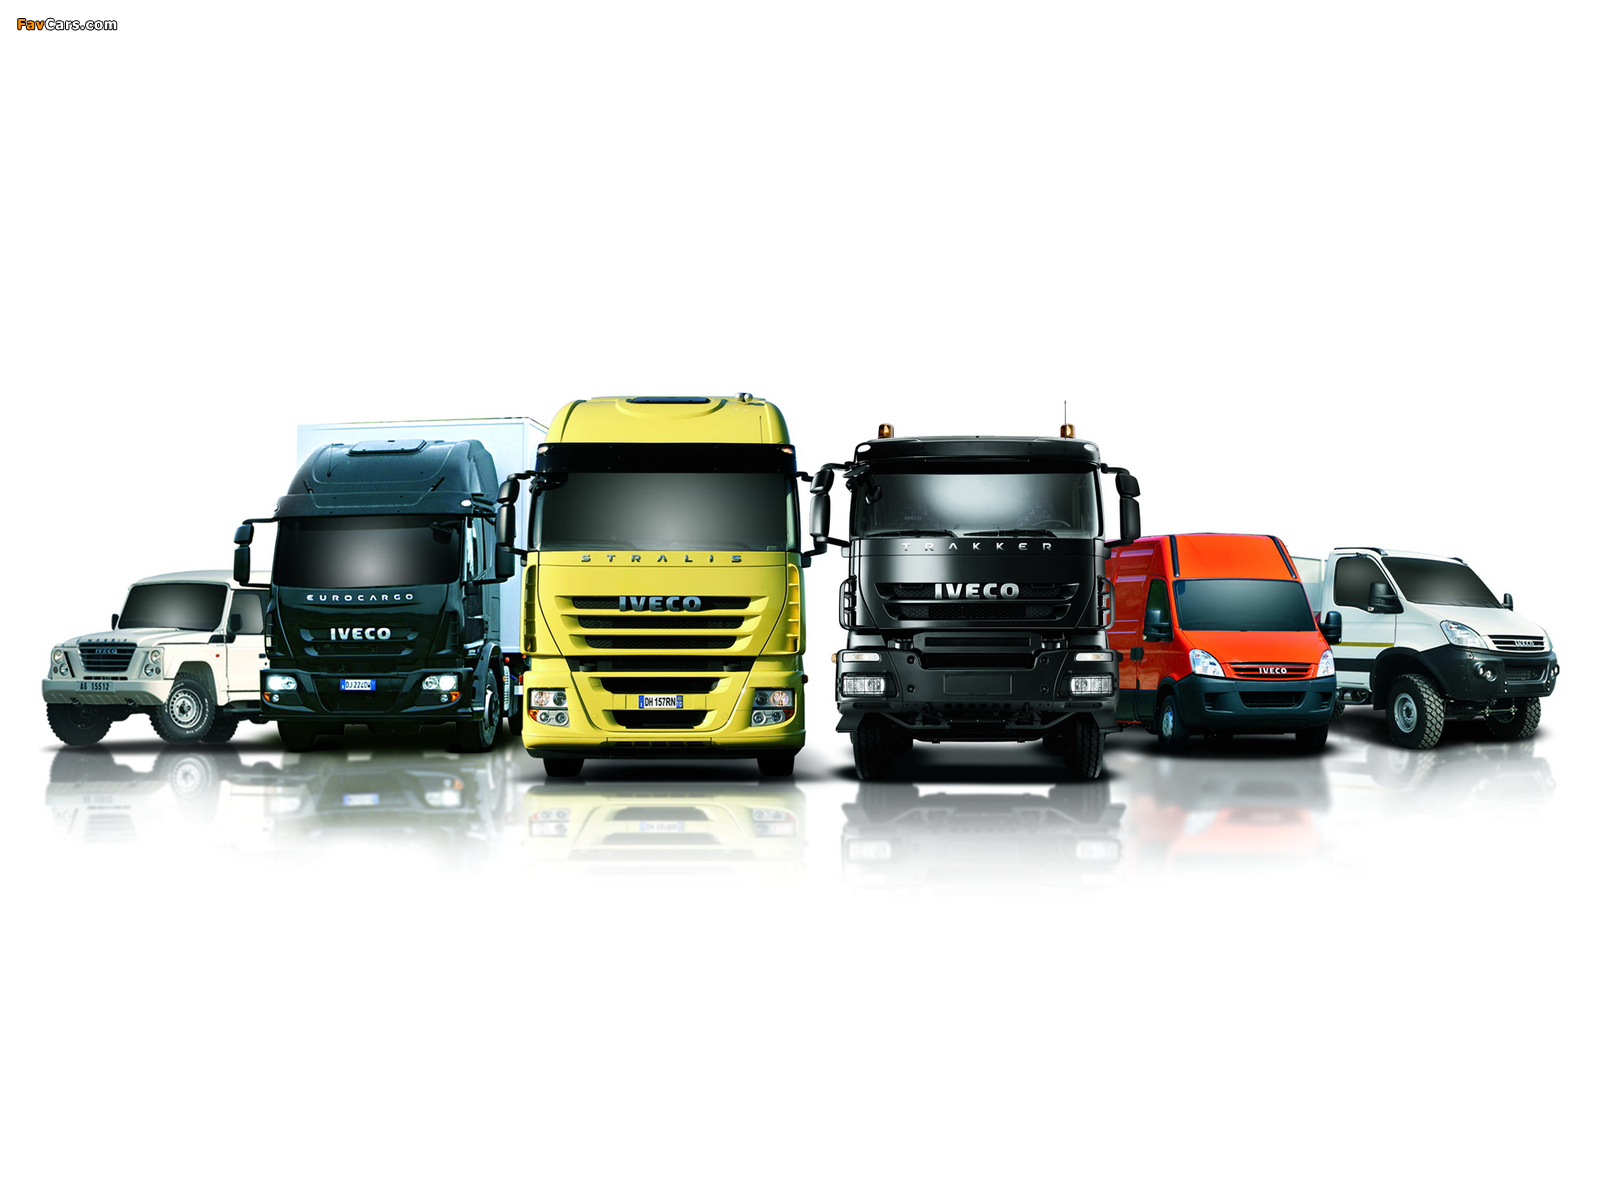 Images of Iveco (1600 x 1200)